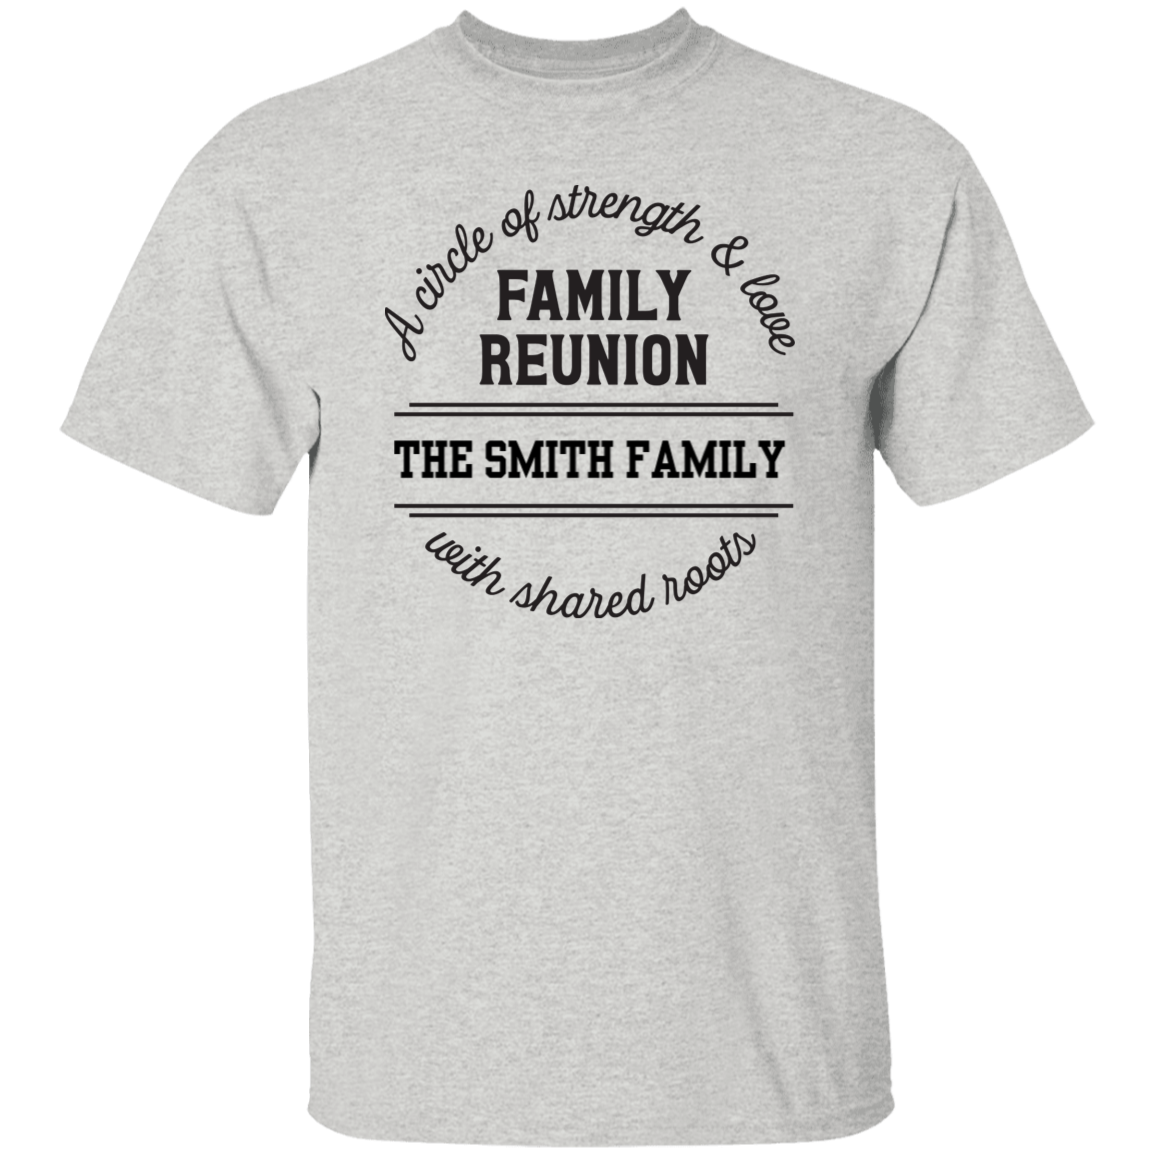 A Circle of Strength and Love Family Reunion Personalized T-Shirt